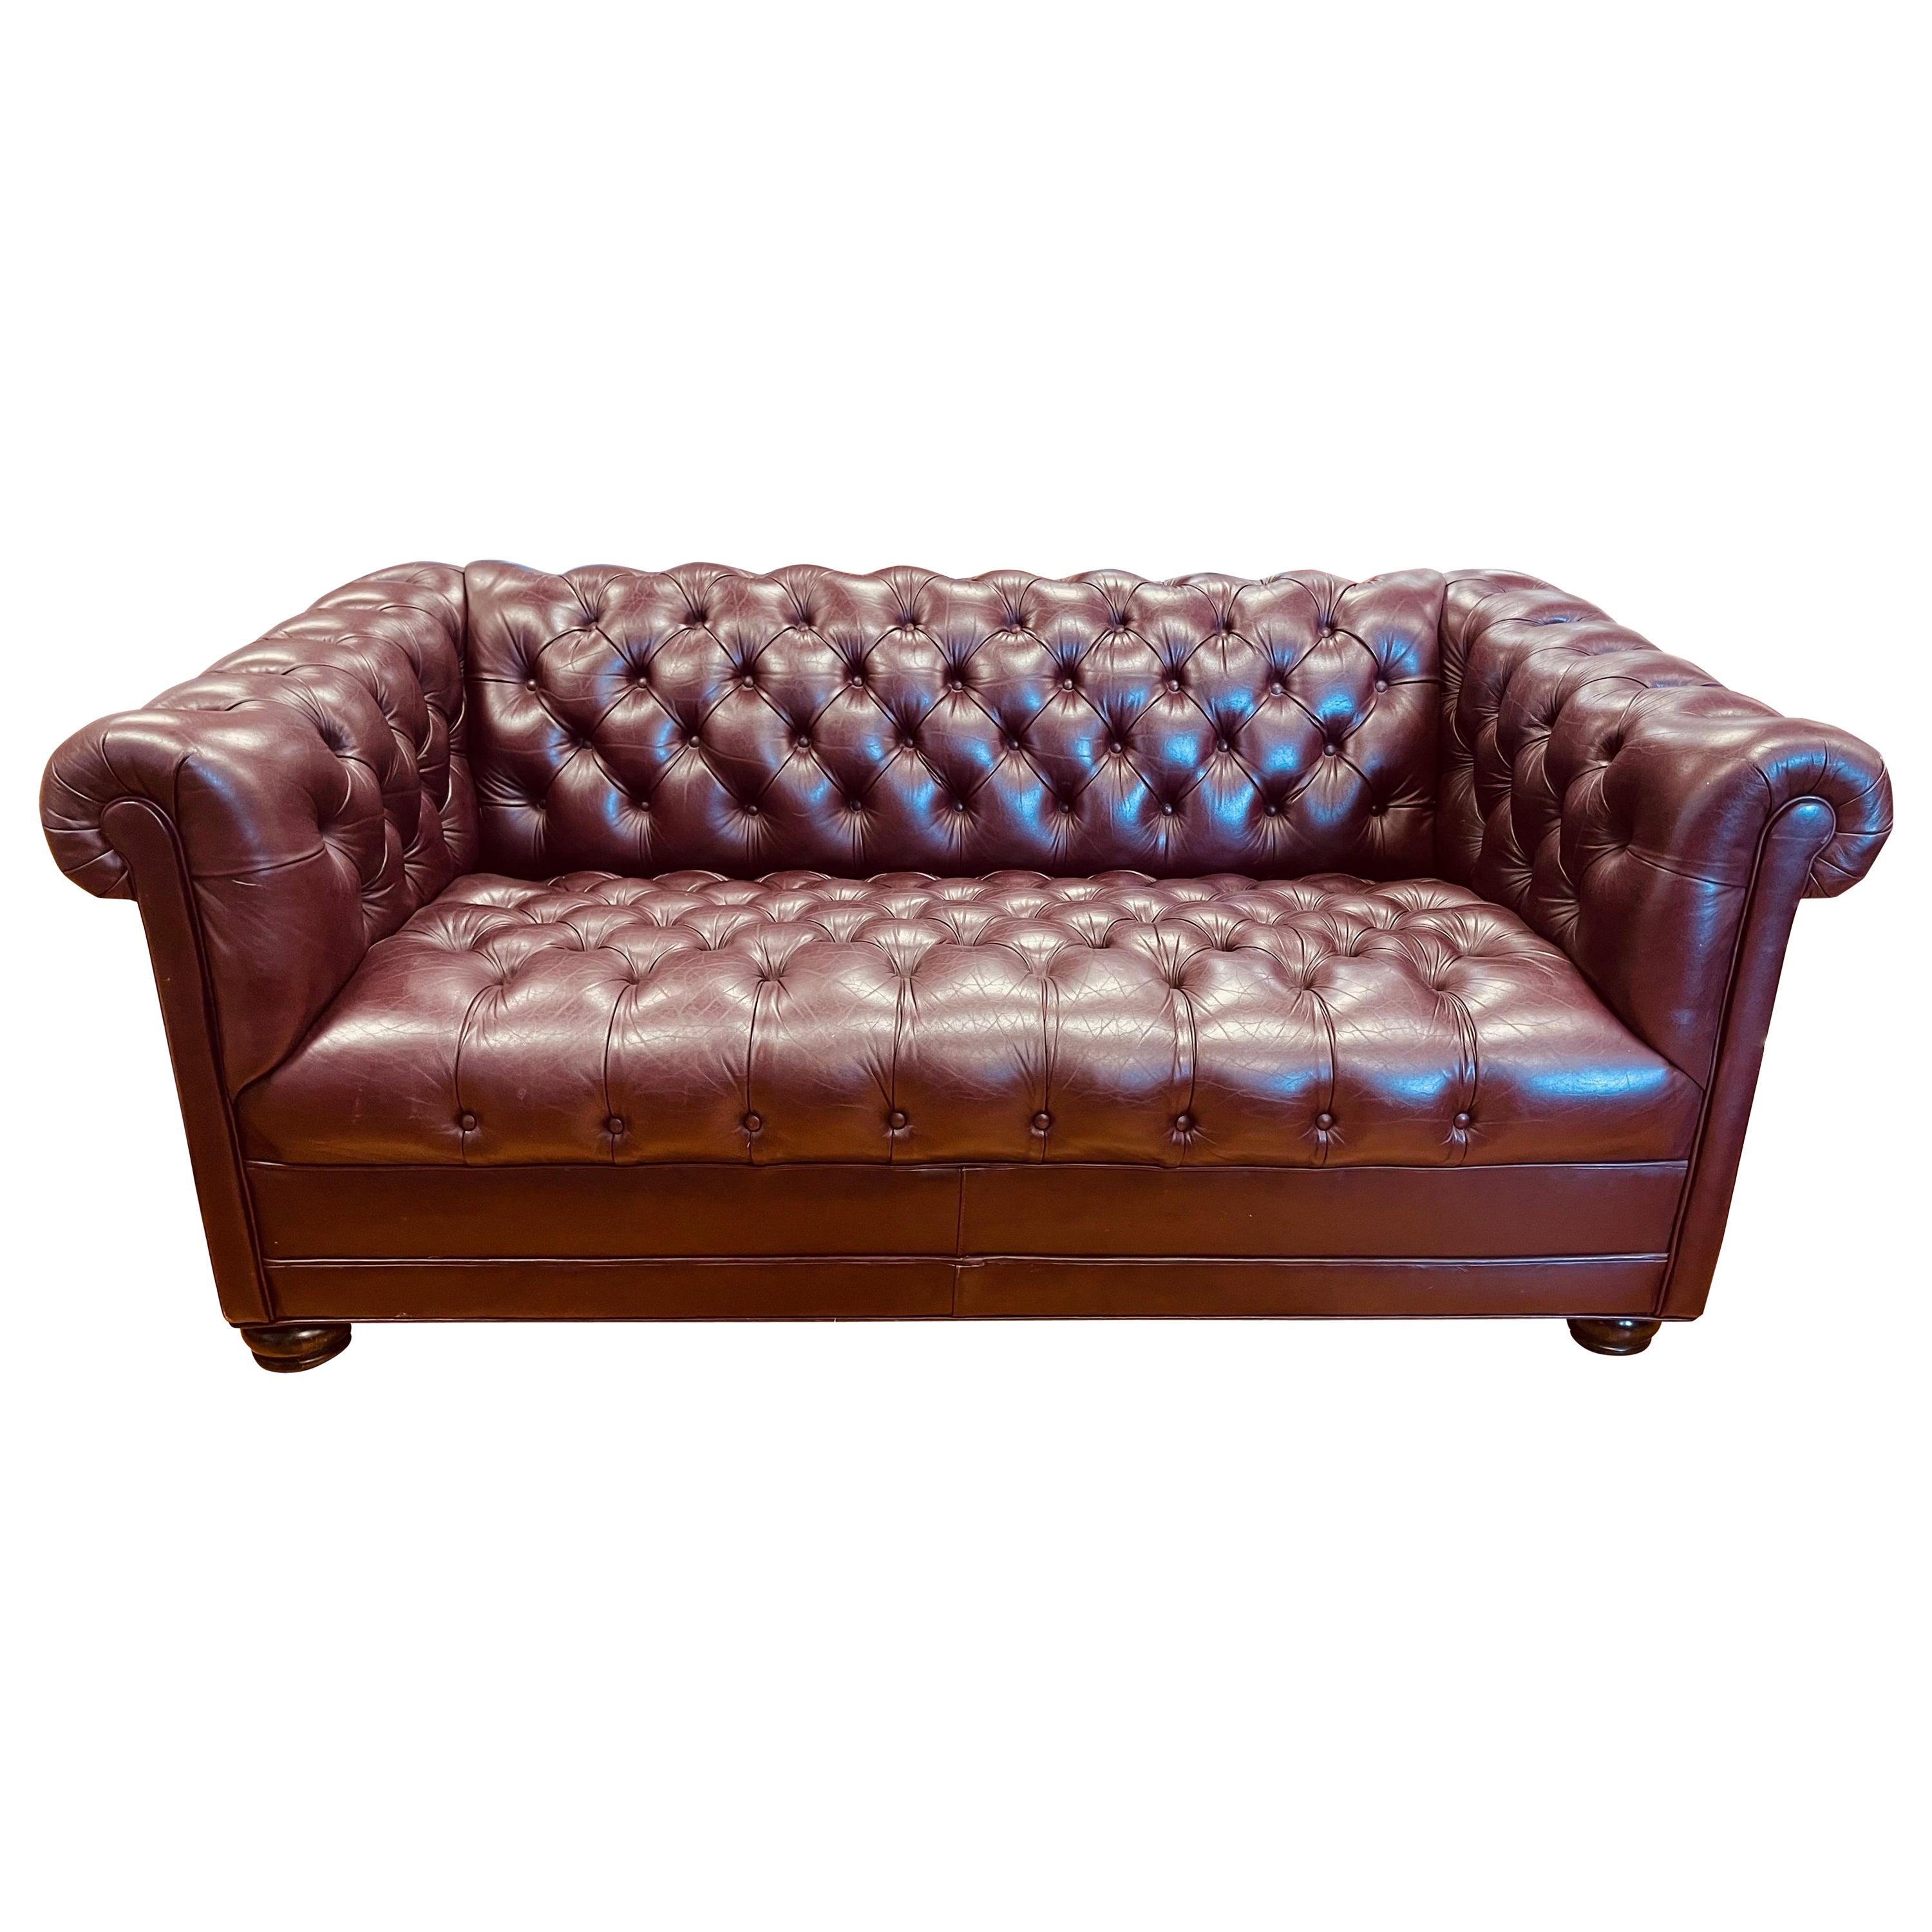 Hancock & Moore Signed Burgundy Oxblood Tufted Chesterfield Loveseat Sofa